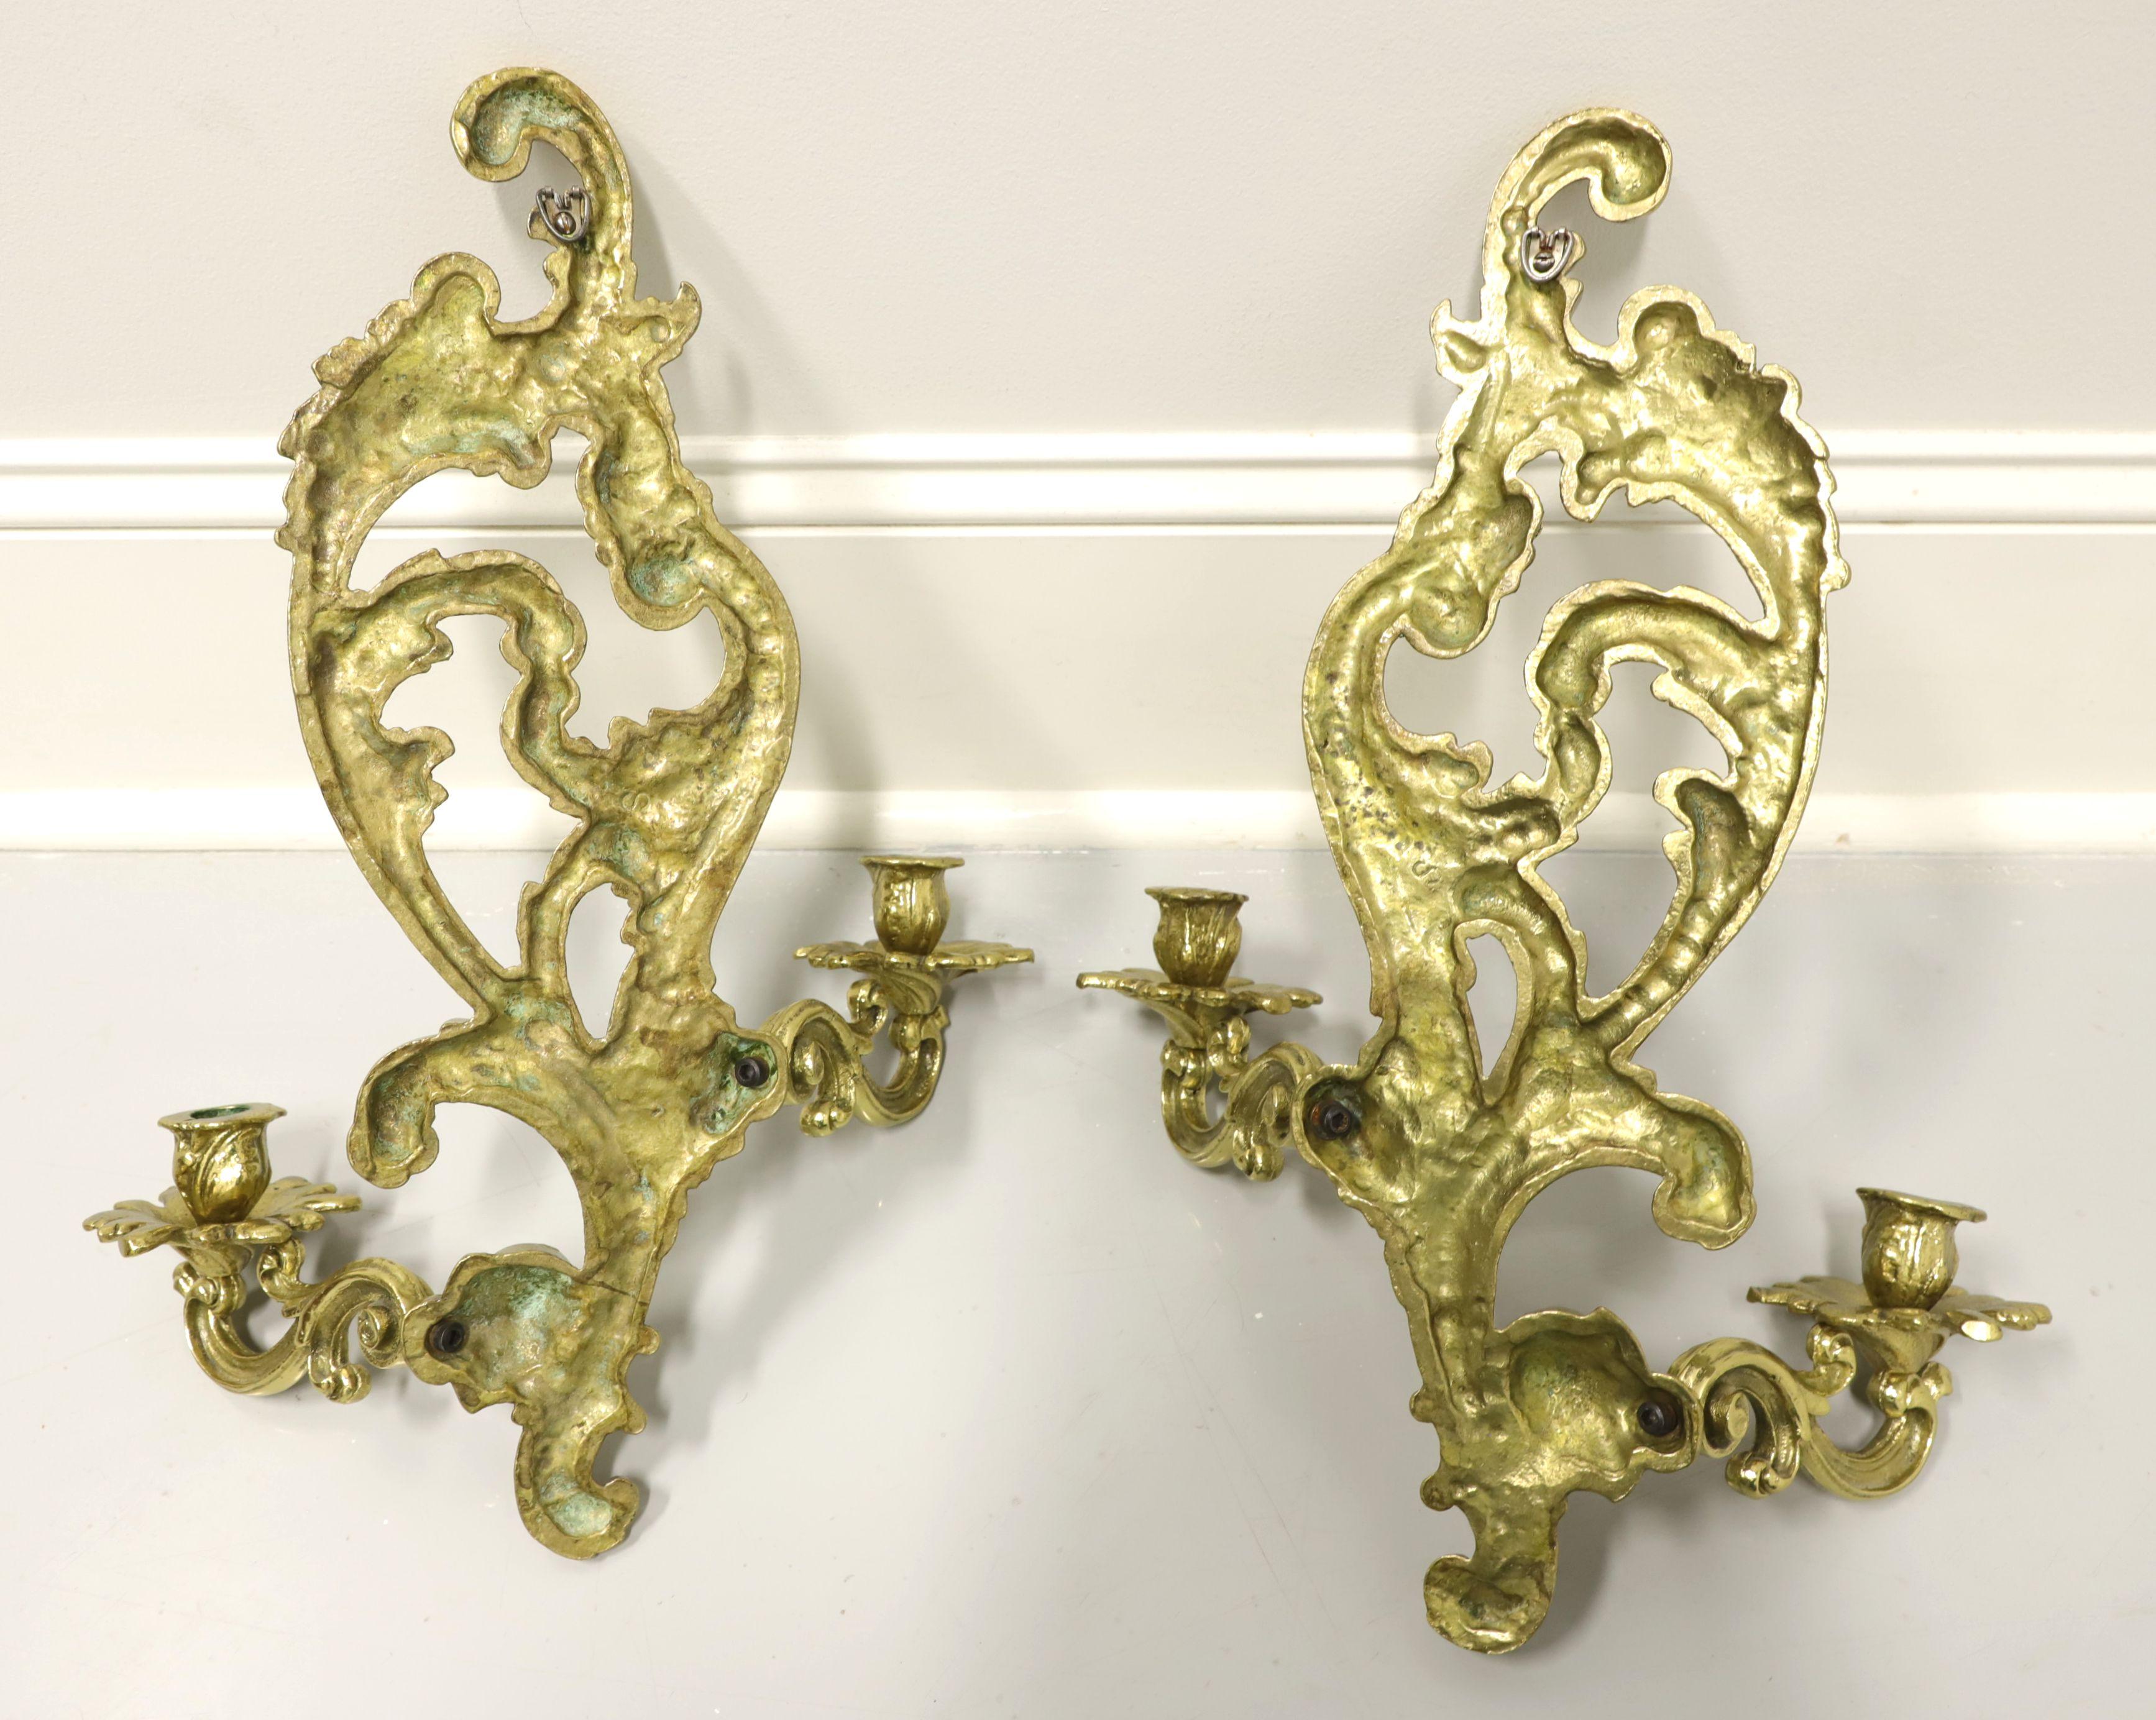 Antique 1920's Solid Brass Rococo Style Candle Wall Sconces - Pair For Sale 4